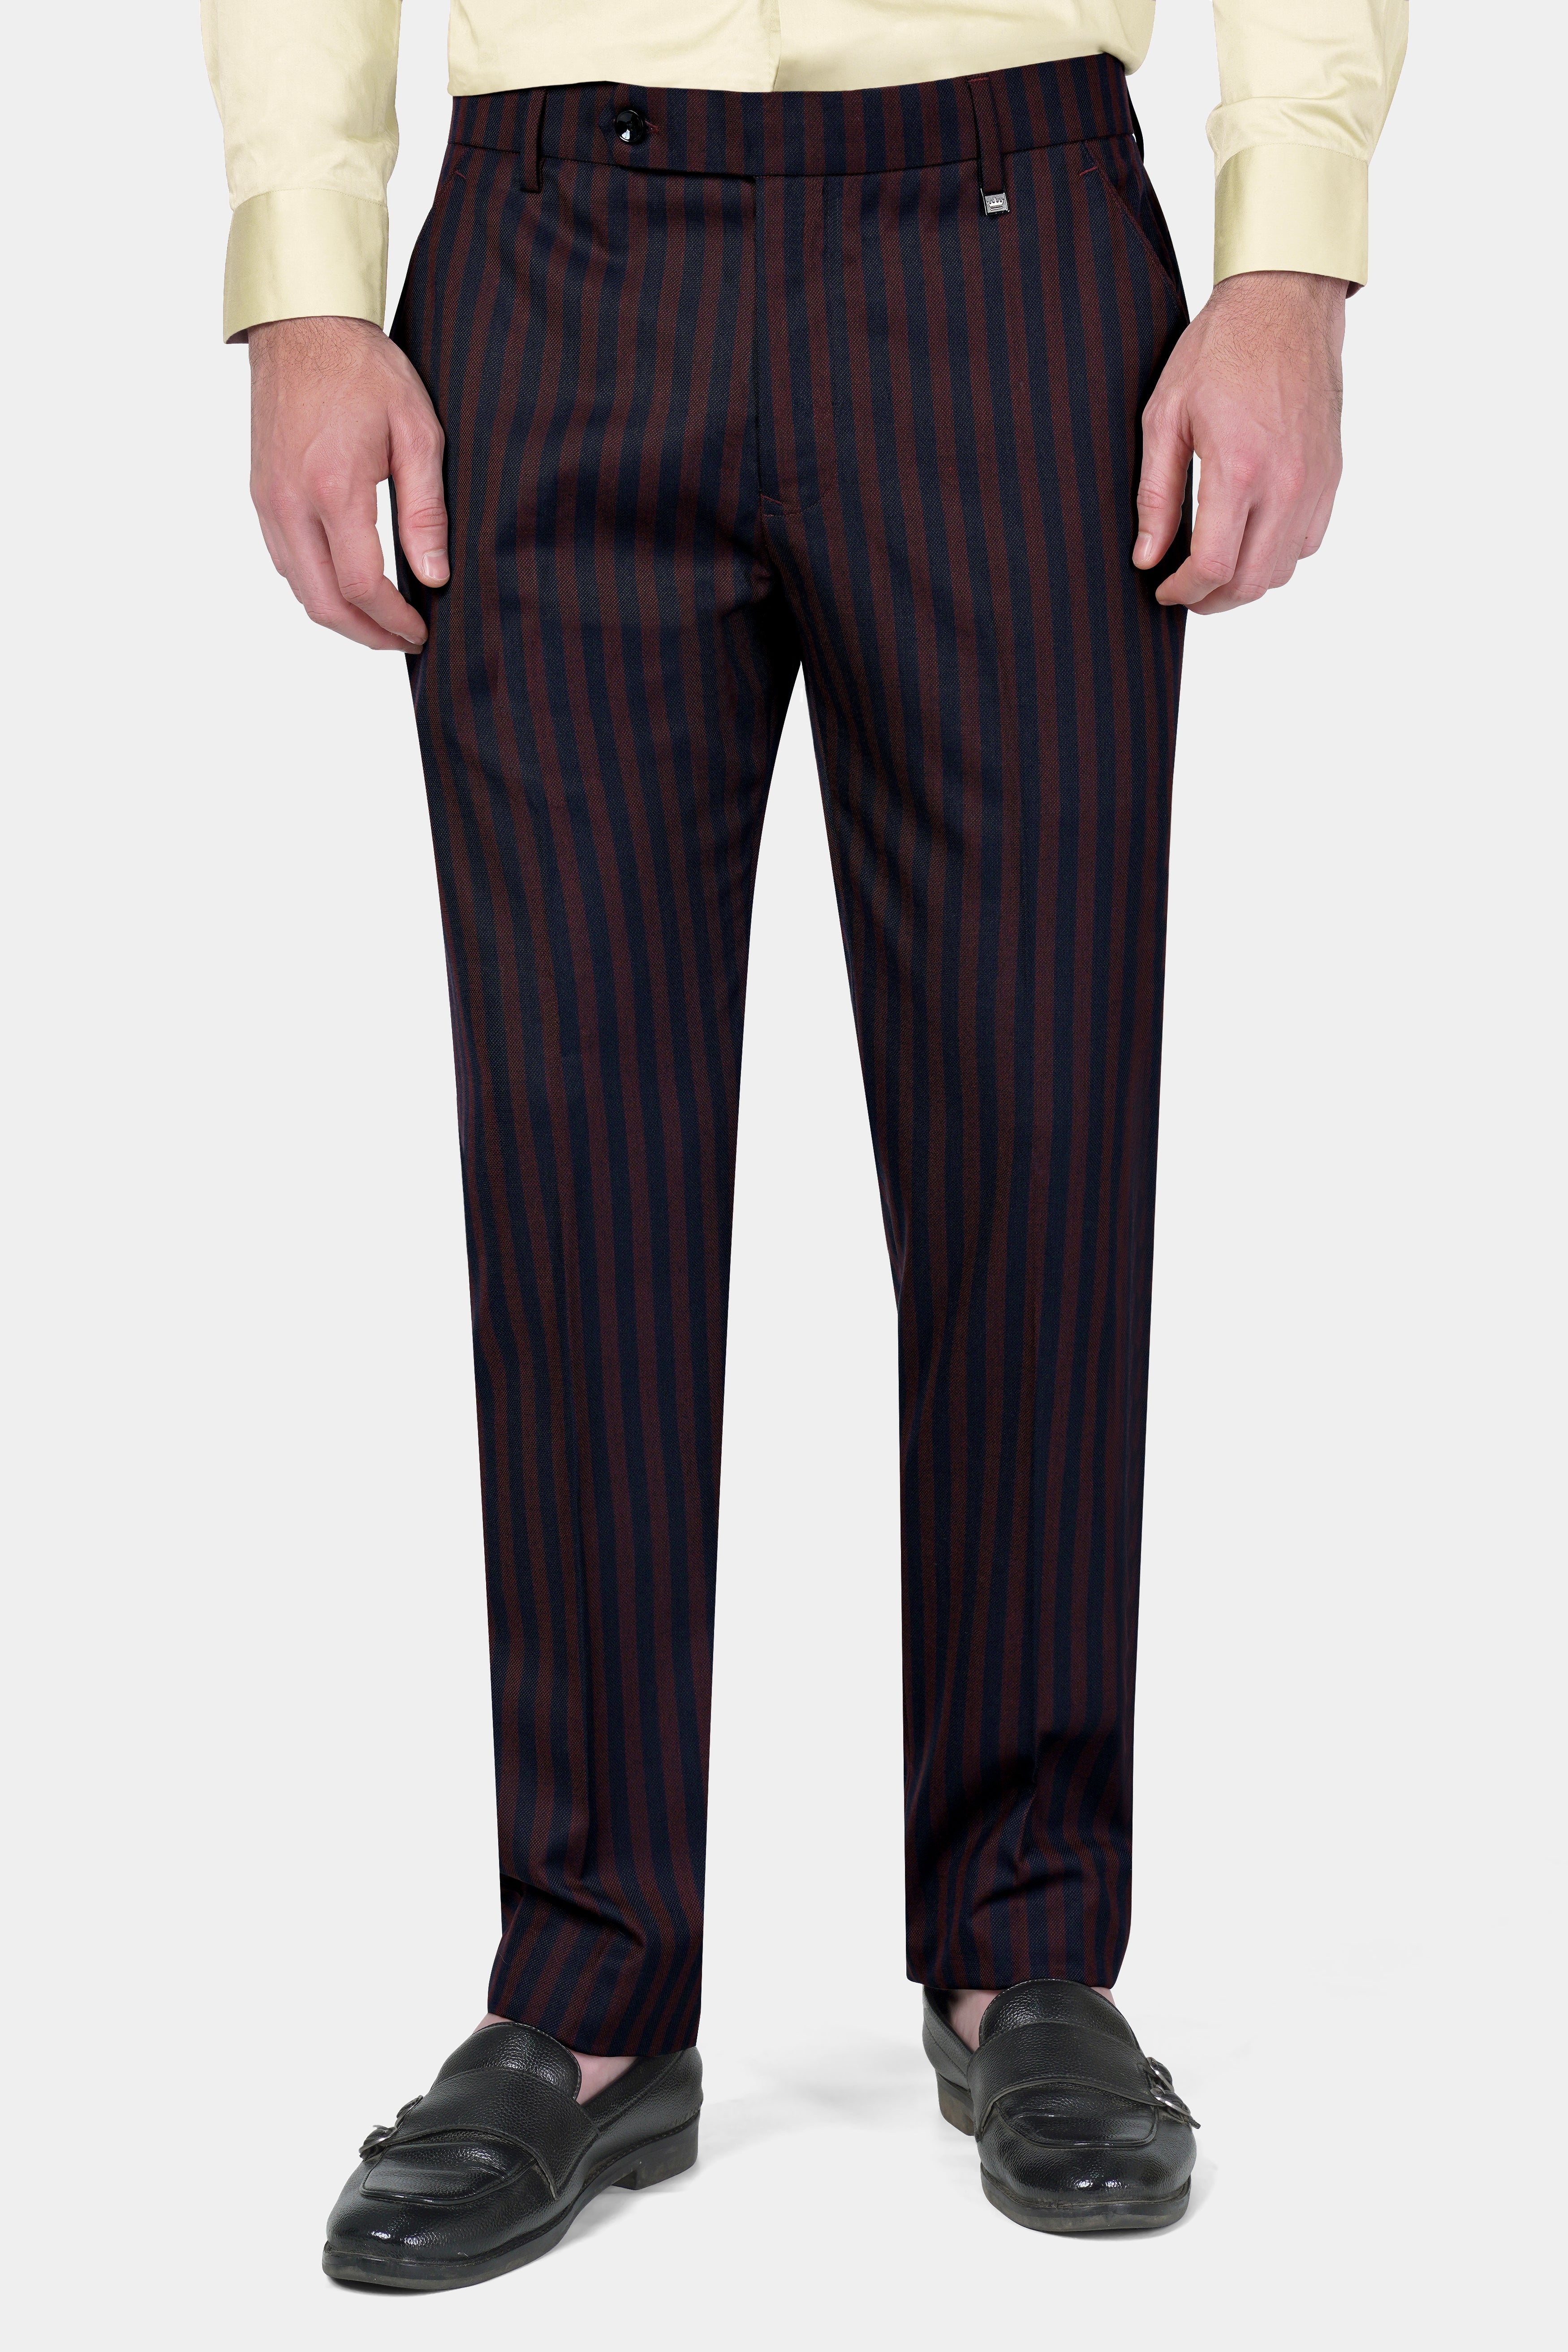 Gondola Brown and Mirage Blue Striped Wool Rich Double Breasted Sports Suit ST3114-DB-PP-36, ST3114-DB-PP-38, ST3114-DB-PP-40, ST3114-DB-PP-42, ST3114-DB-PP-44, ST3114-DB-PP-46, ST3114-DB-PP-48, ST3114-DB-PP-50, ST3114-DB-PP-52, ST3114-DB-PP-54, ST3114-DB-PP-56, ST3114-DB-PP-58, ST3114-DB-PP-60